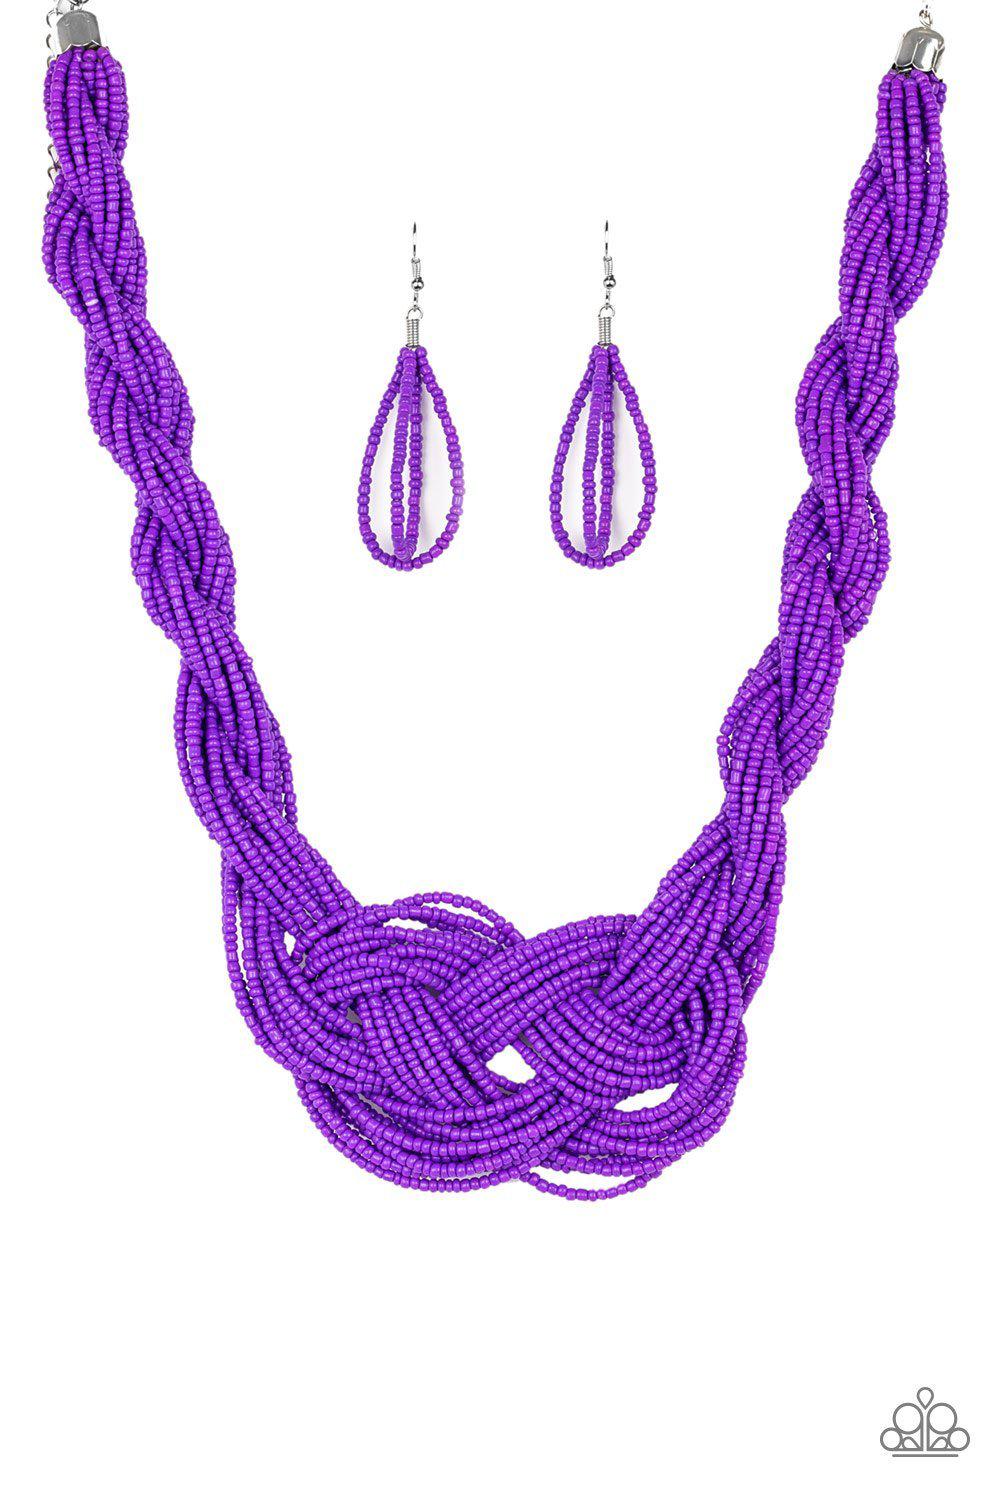 A Standing Ovation Purple Seed Bead Necklace and matching Earrings - Paparazzi Accessories-CarasShop.com - $5 Jewelry by Cara Jewels